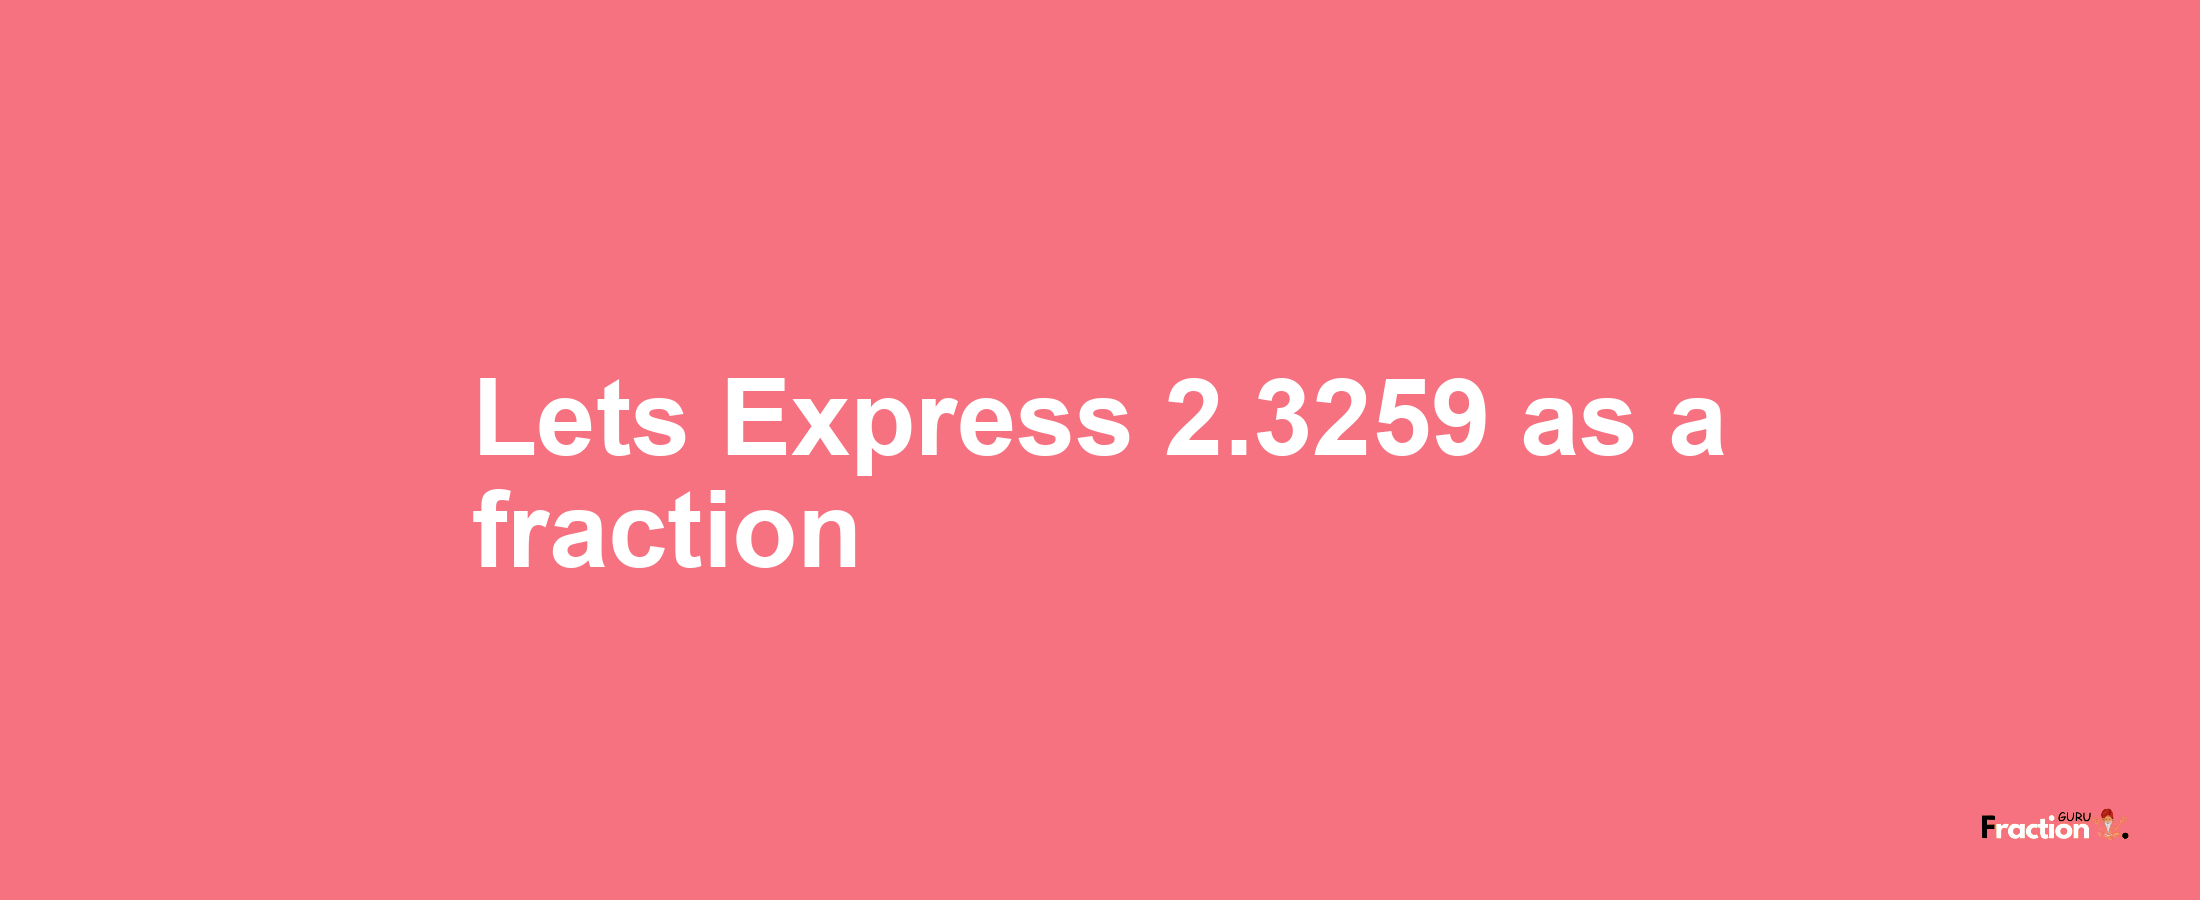 Lets Express 2.3259 as afraction